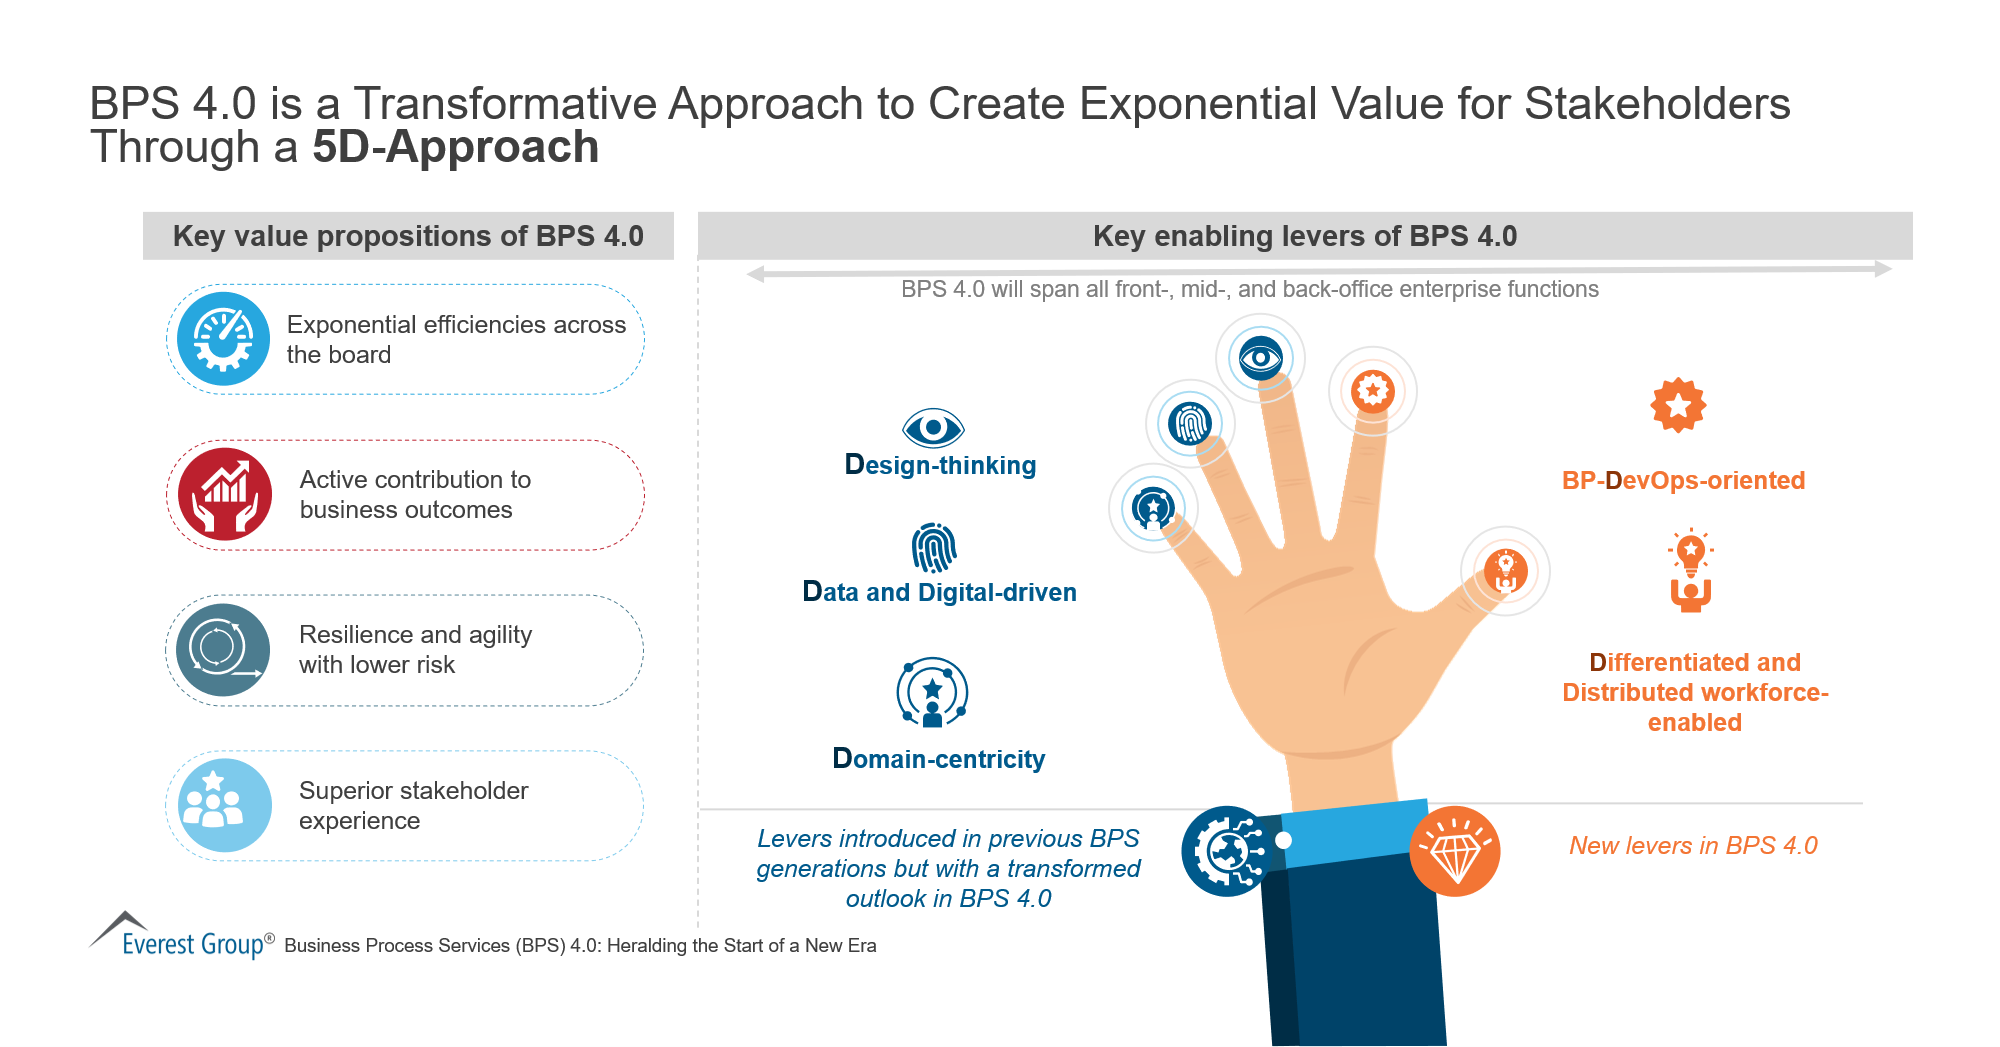 BPS 4.0 is a Transformative Approach